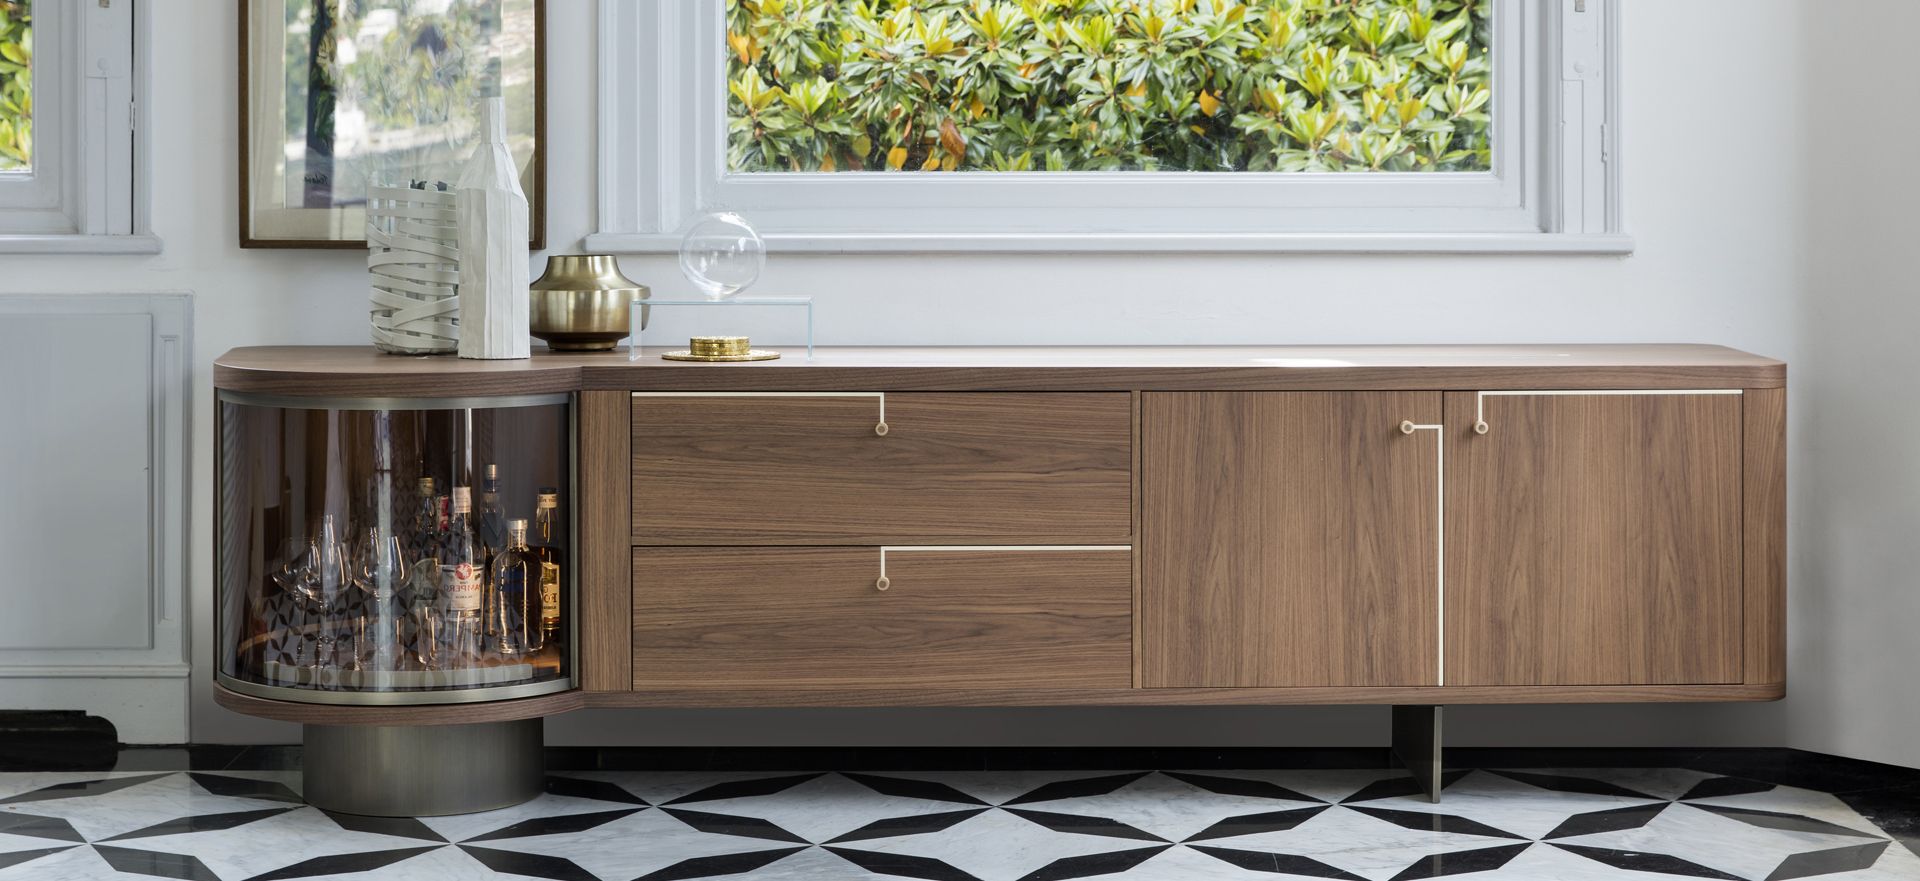 Sideboards & Cupboards | Contemporary Dining Furniture | London Pertaining To Modern And Contemporary Sideboards (View 8 of 20)